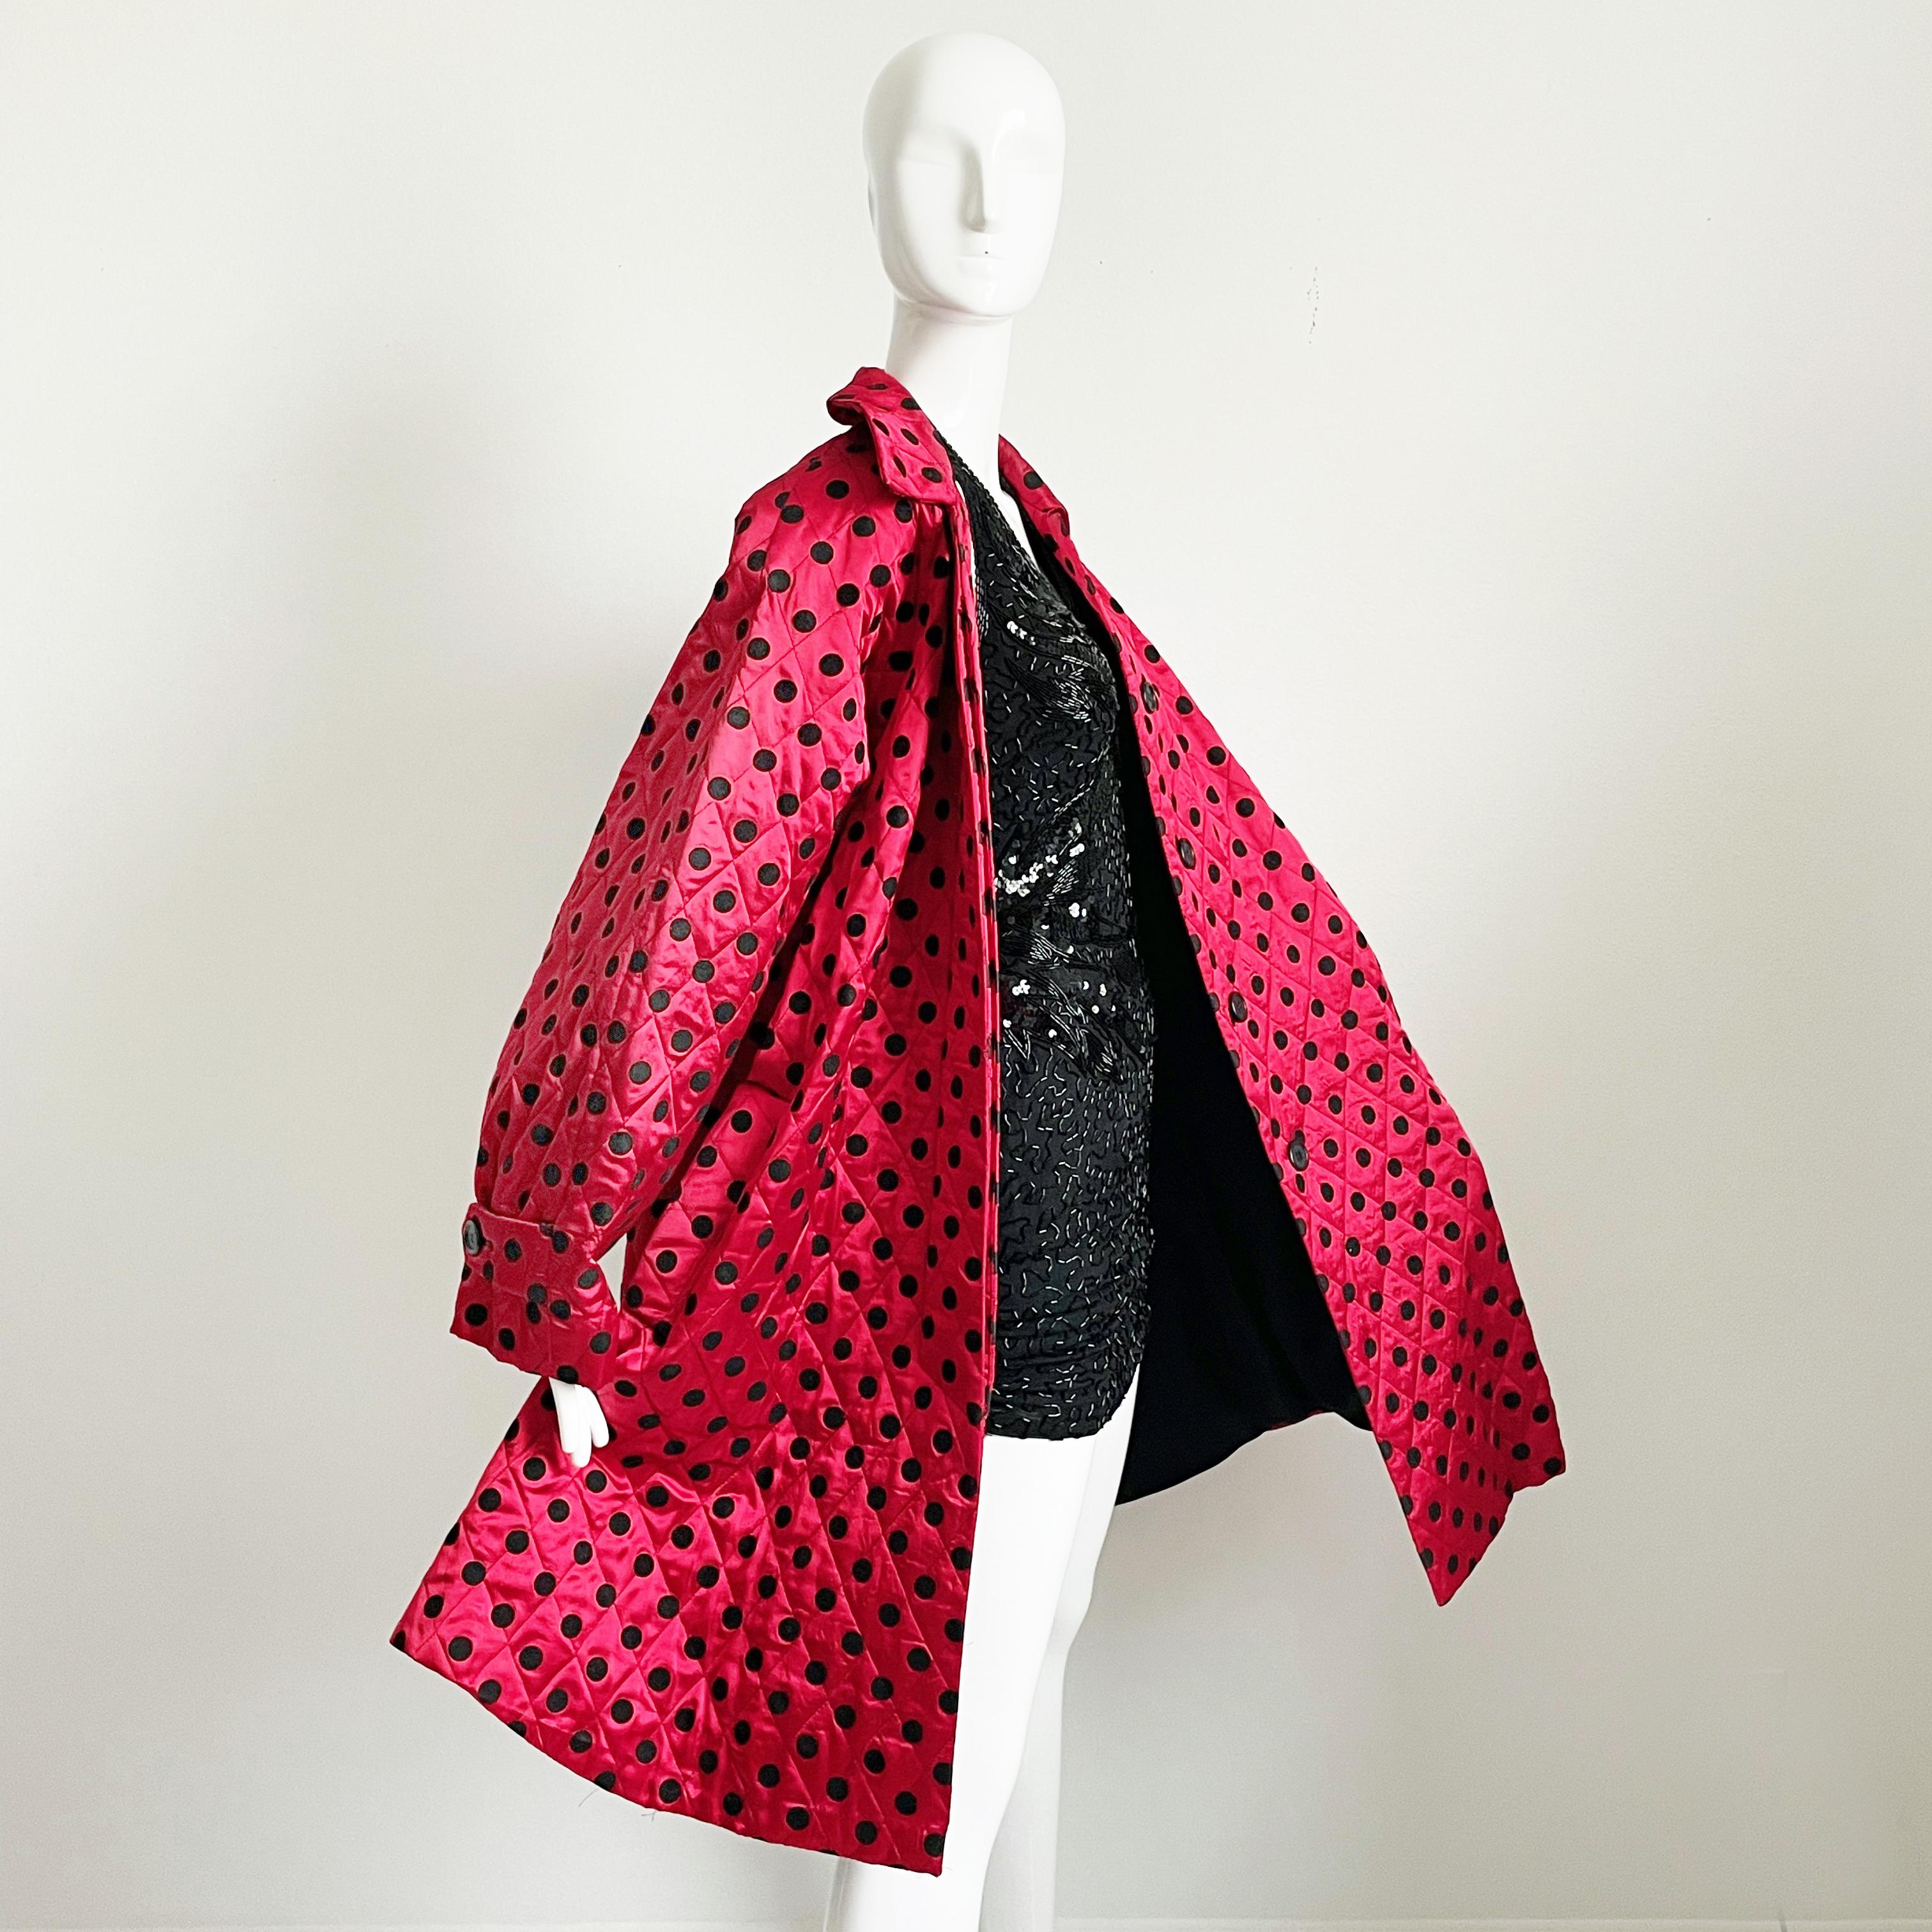 This fabulous swing coat was made by Christian Dior, most likely in the 80s. Dior has utilized the both the swing coat silhouette (most notably when Yves Saint Laurent designed for the house) and polka dot patterns in their designs throughout the